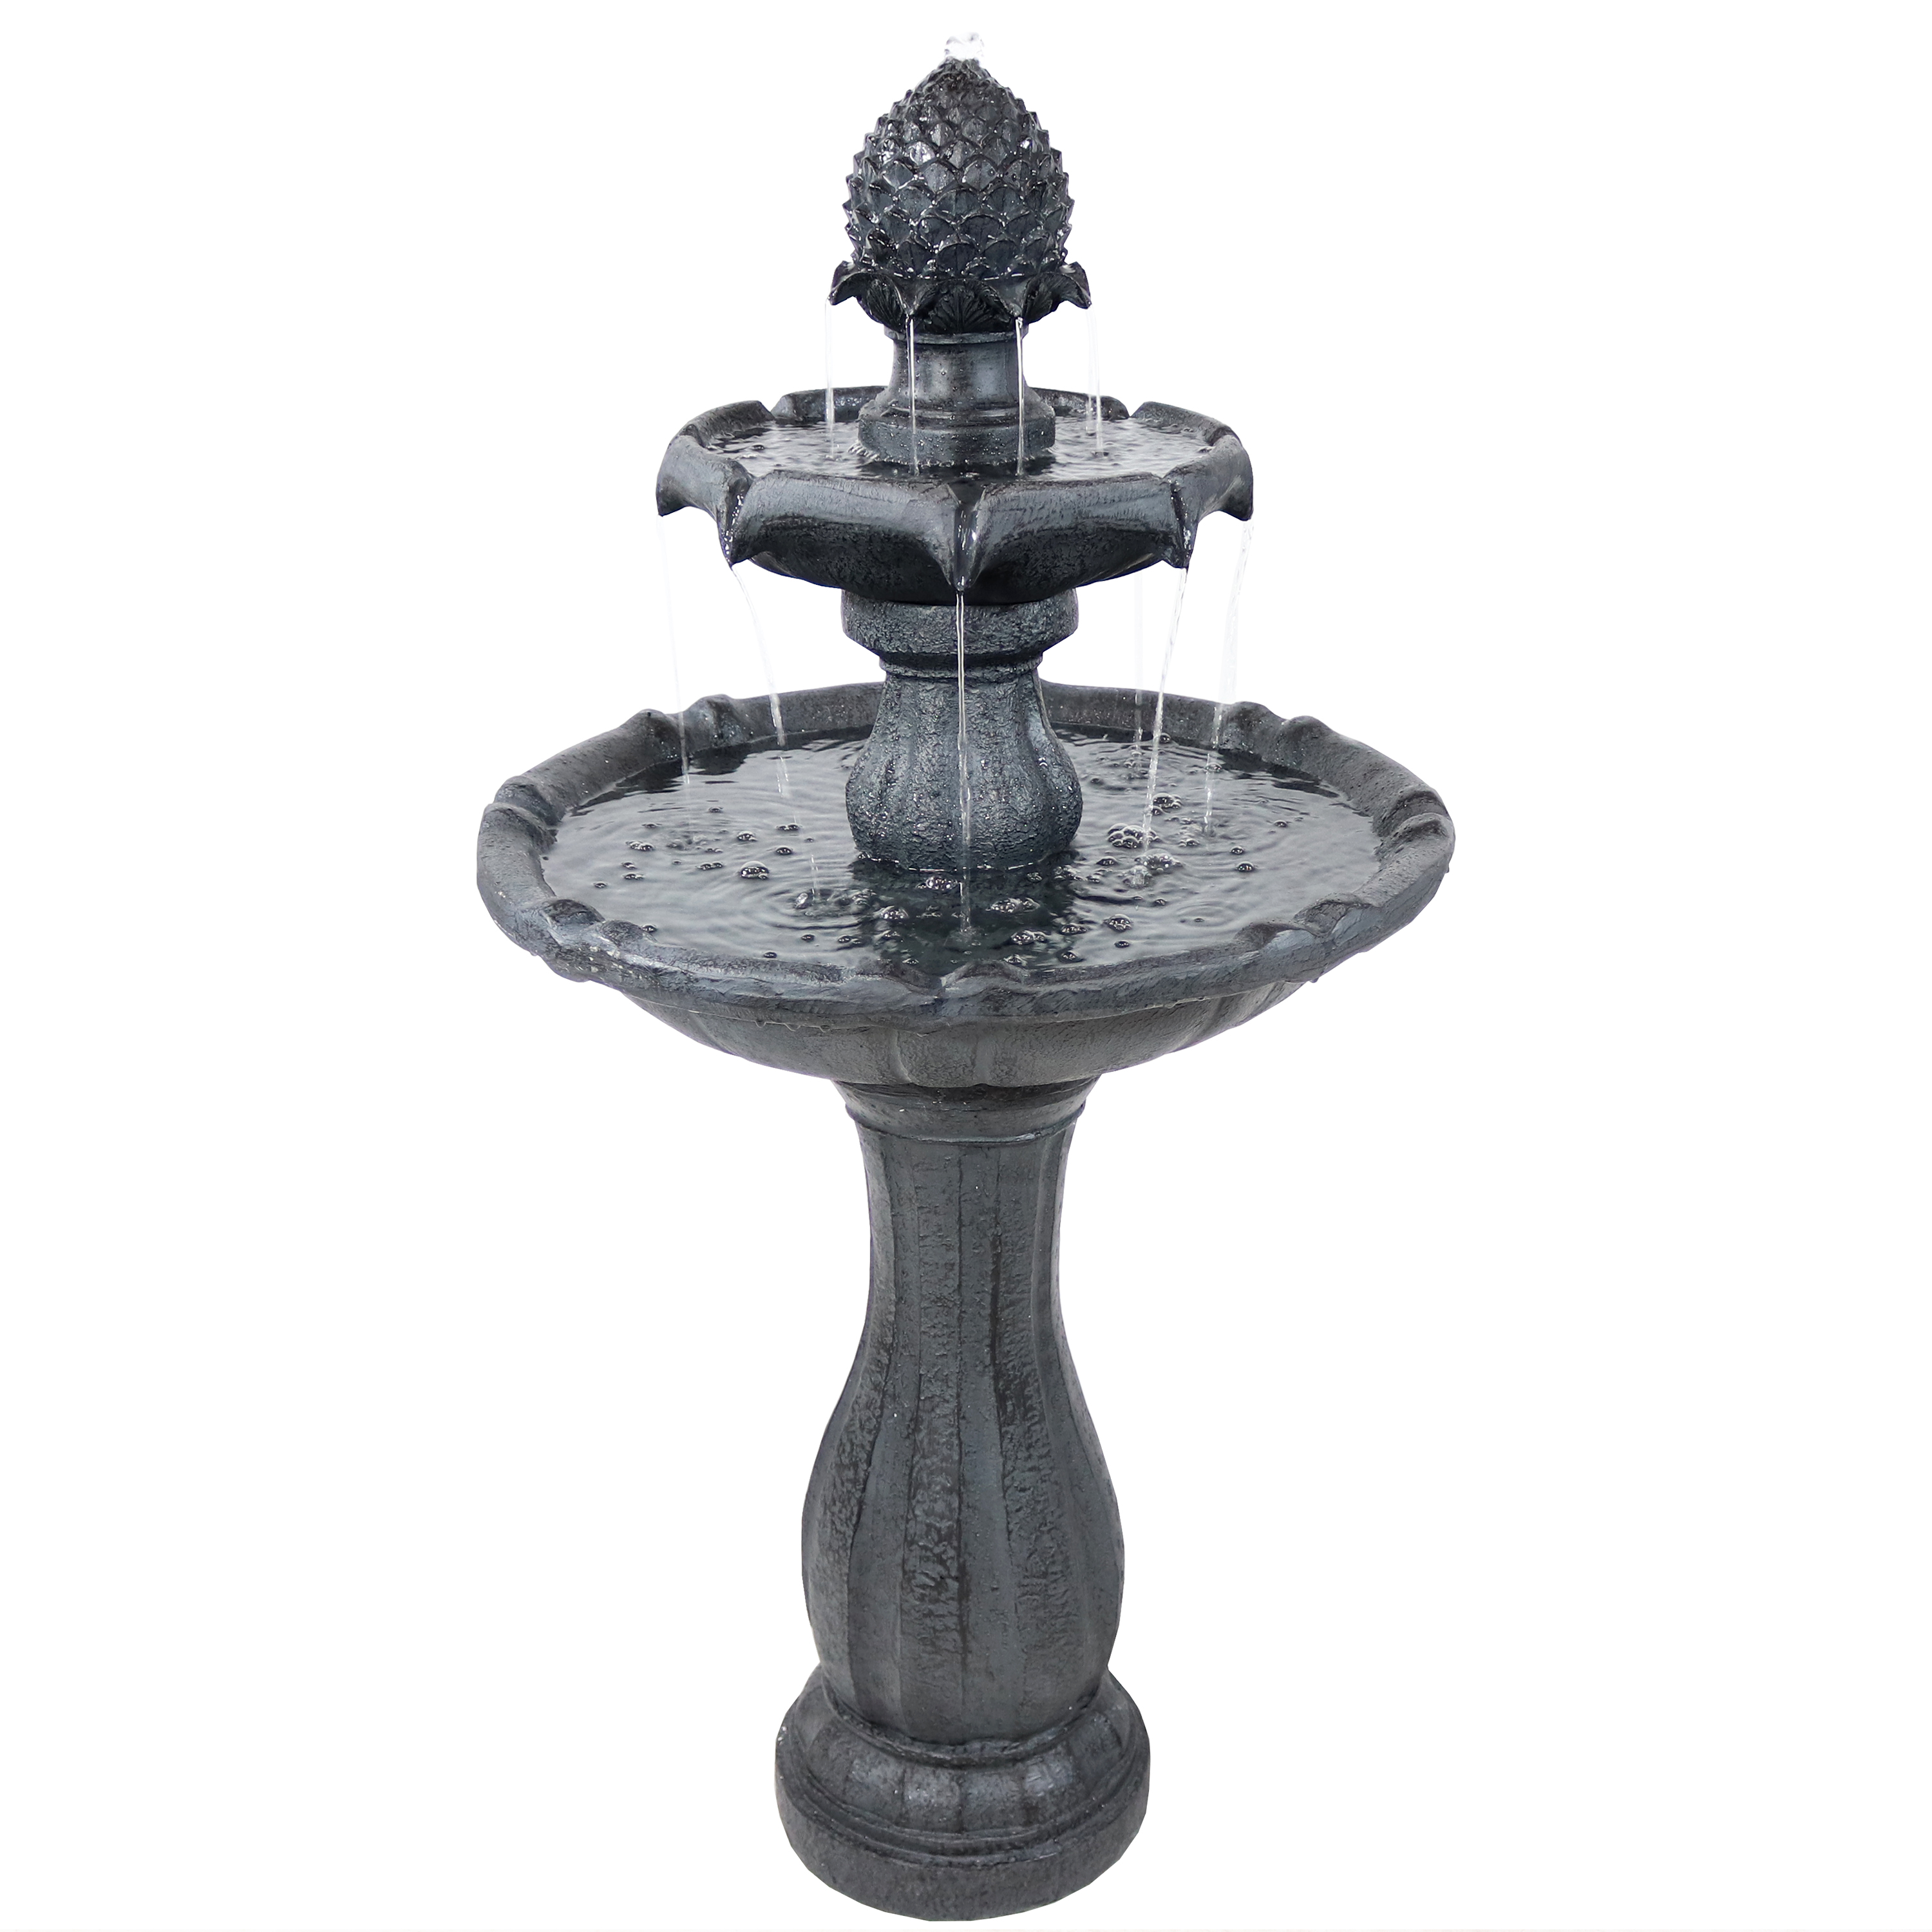 Sunnydaze 2-Tier Pineapple Solar Fountain with Battery Backup, Black Finish, 46 Inch Tall, No